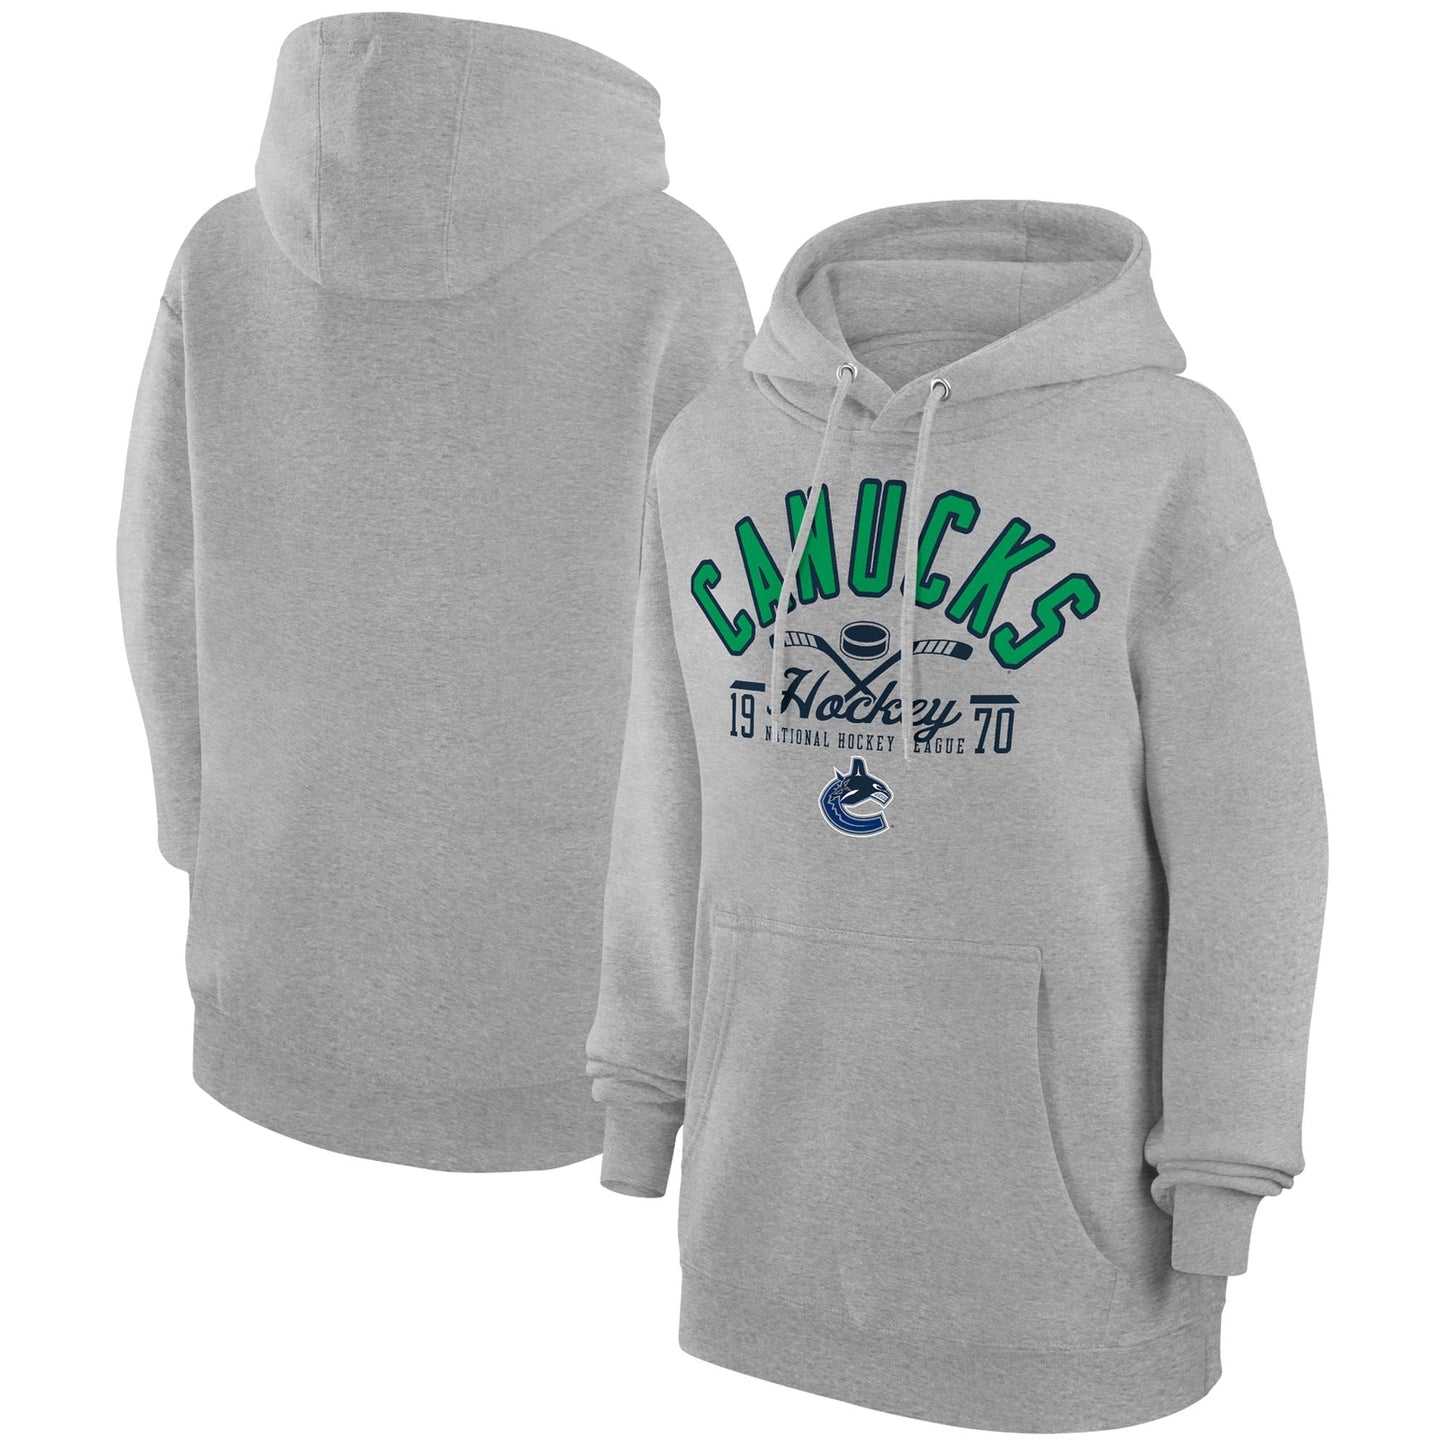 Men's Starter  Heather Gray Vancouver Canucks Puck Pullover Hoodie